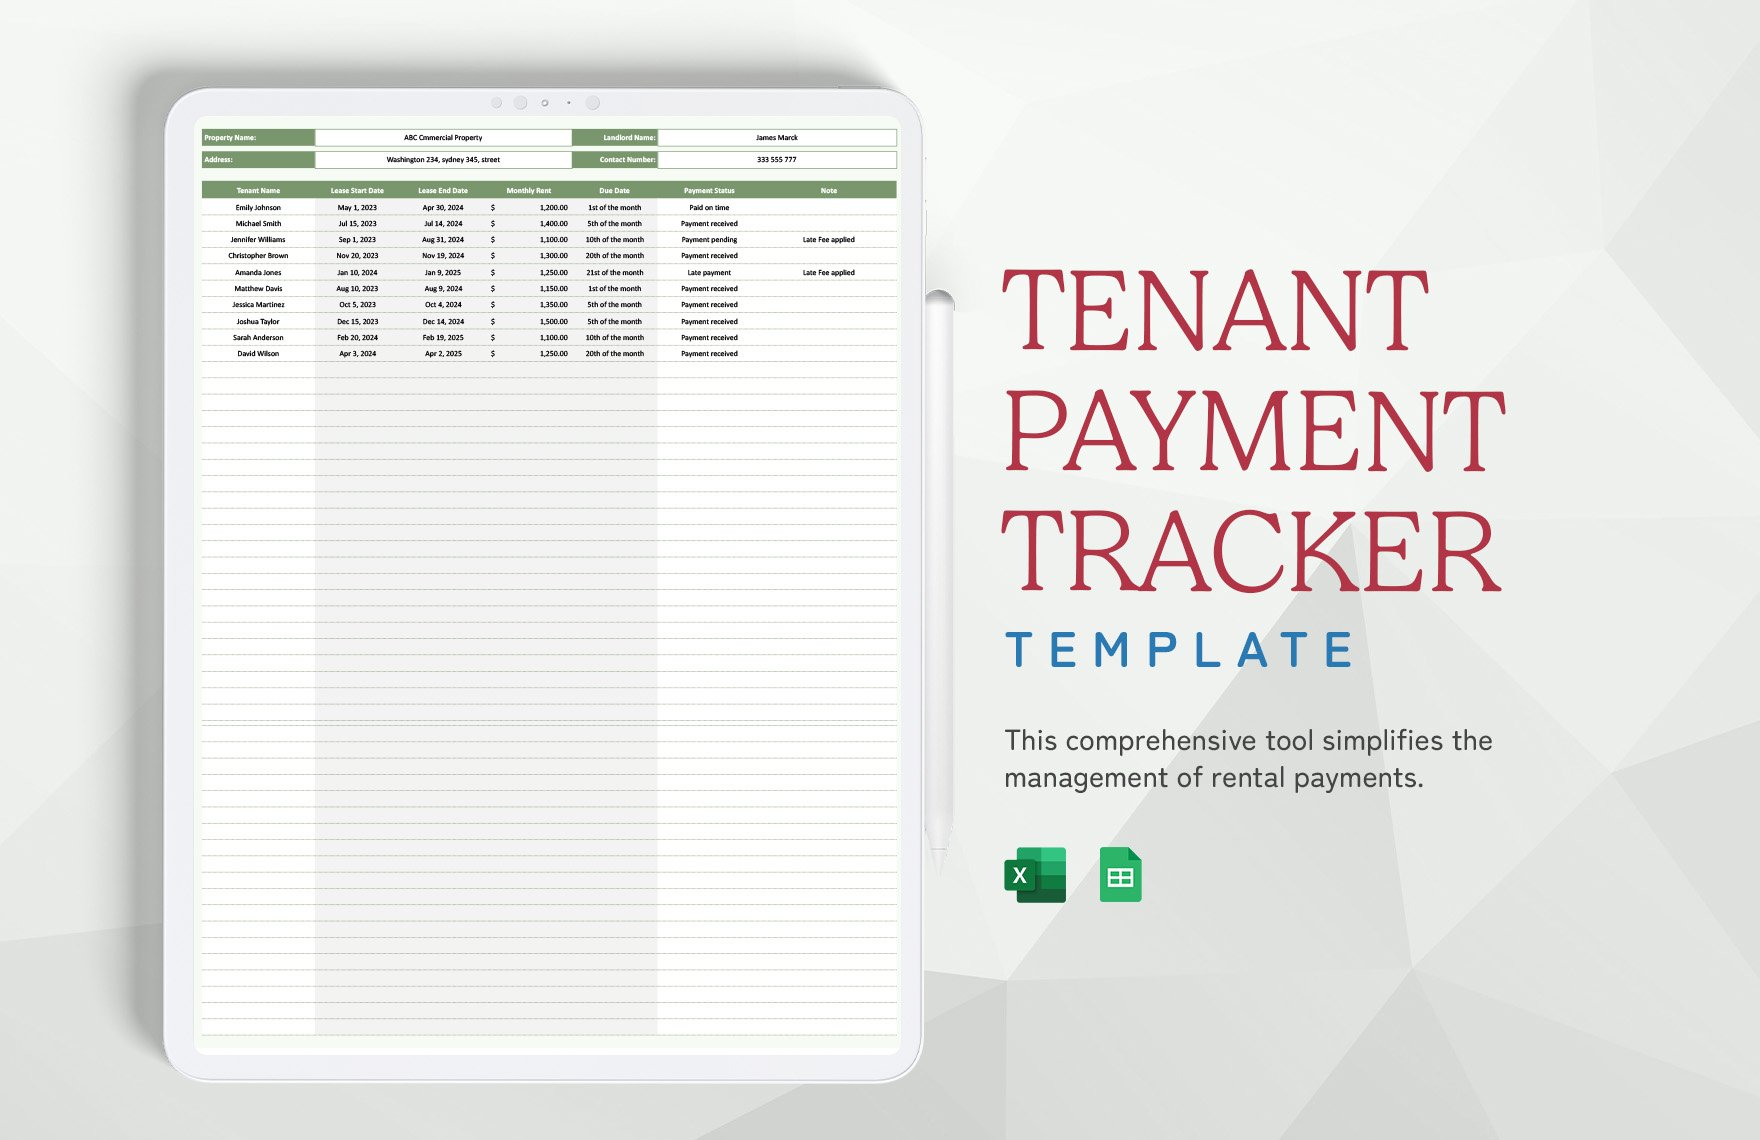 Tenant Payment Tracker Template in Excel, Google Sheets